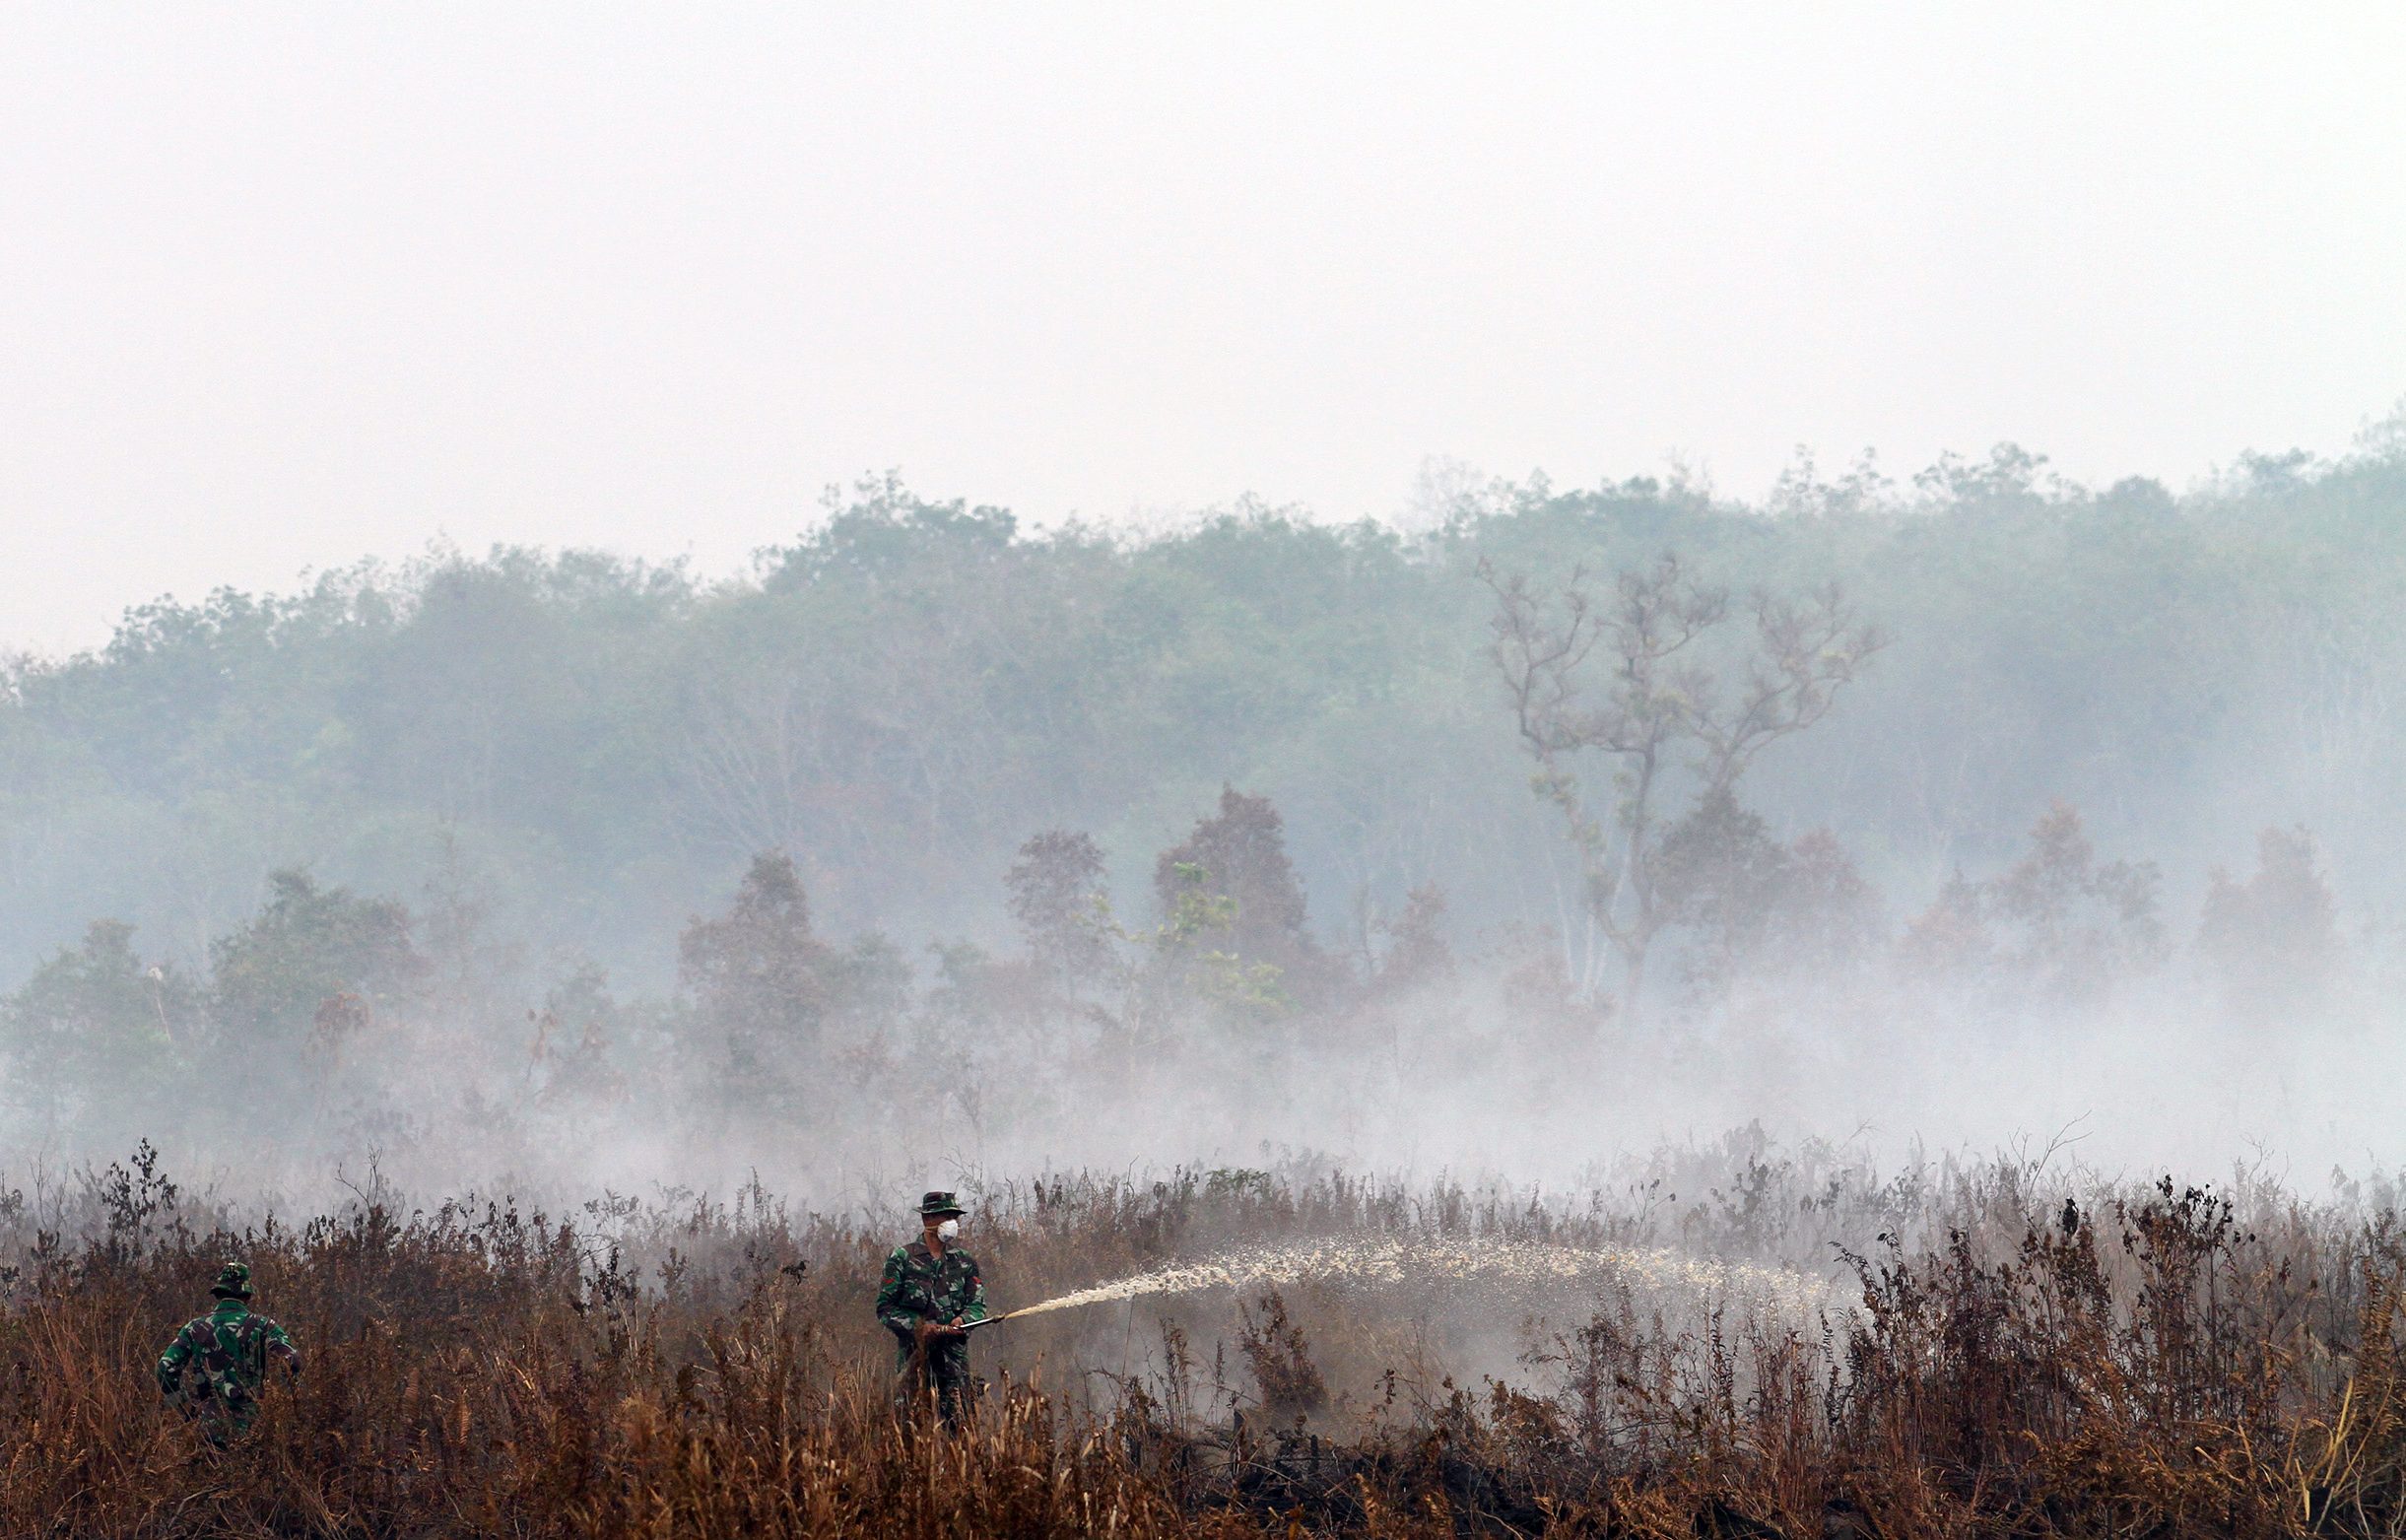 RAGING FIRES. Indonesian military personnel extinguish the wildfire on a peat land in Pampangan, Ogan Komering Ilir, South Sumatra Province, Indonesia, 13 September 2015. EPA/TAMY UTARY 